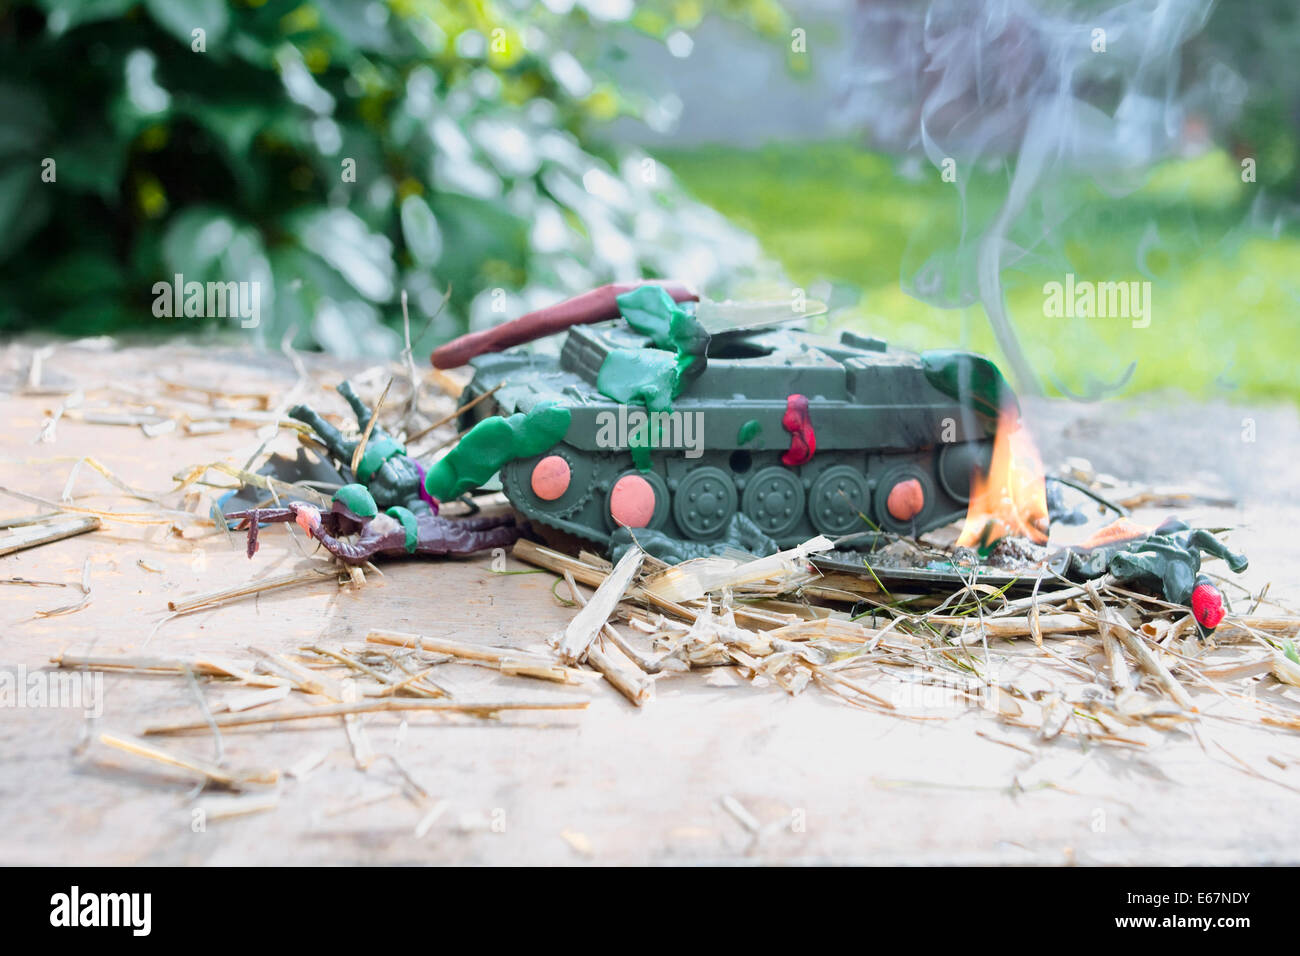 Destroyed toy tank and injured soldiers Stock Photo